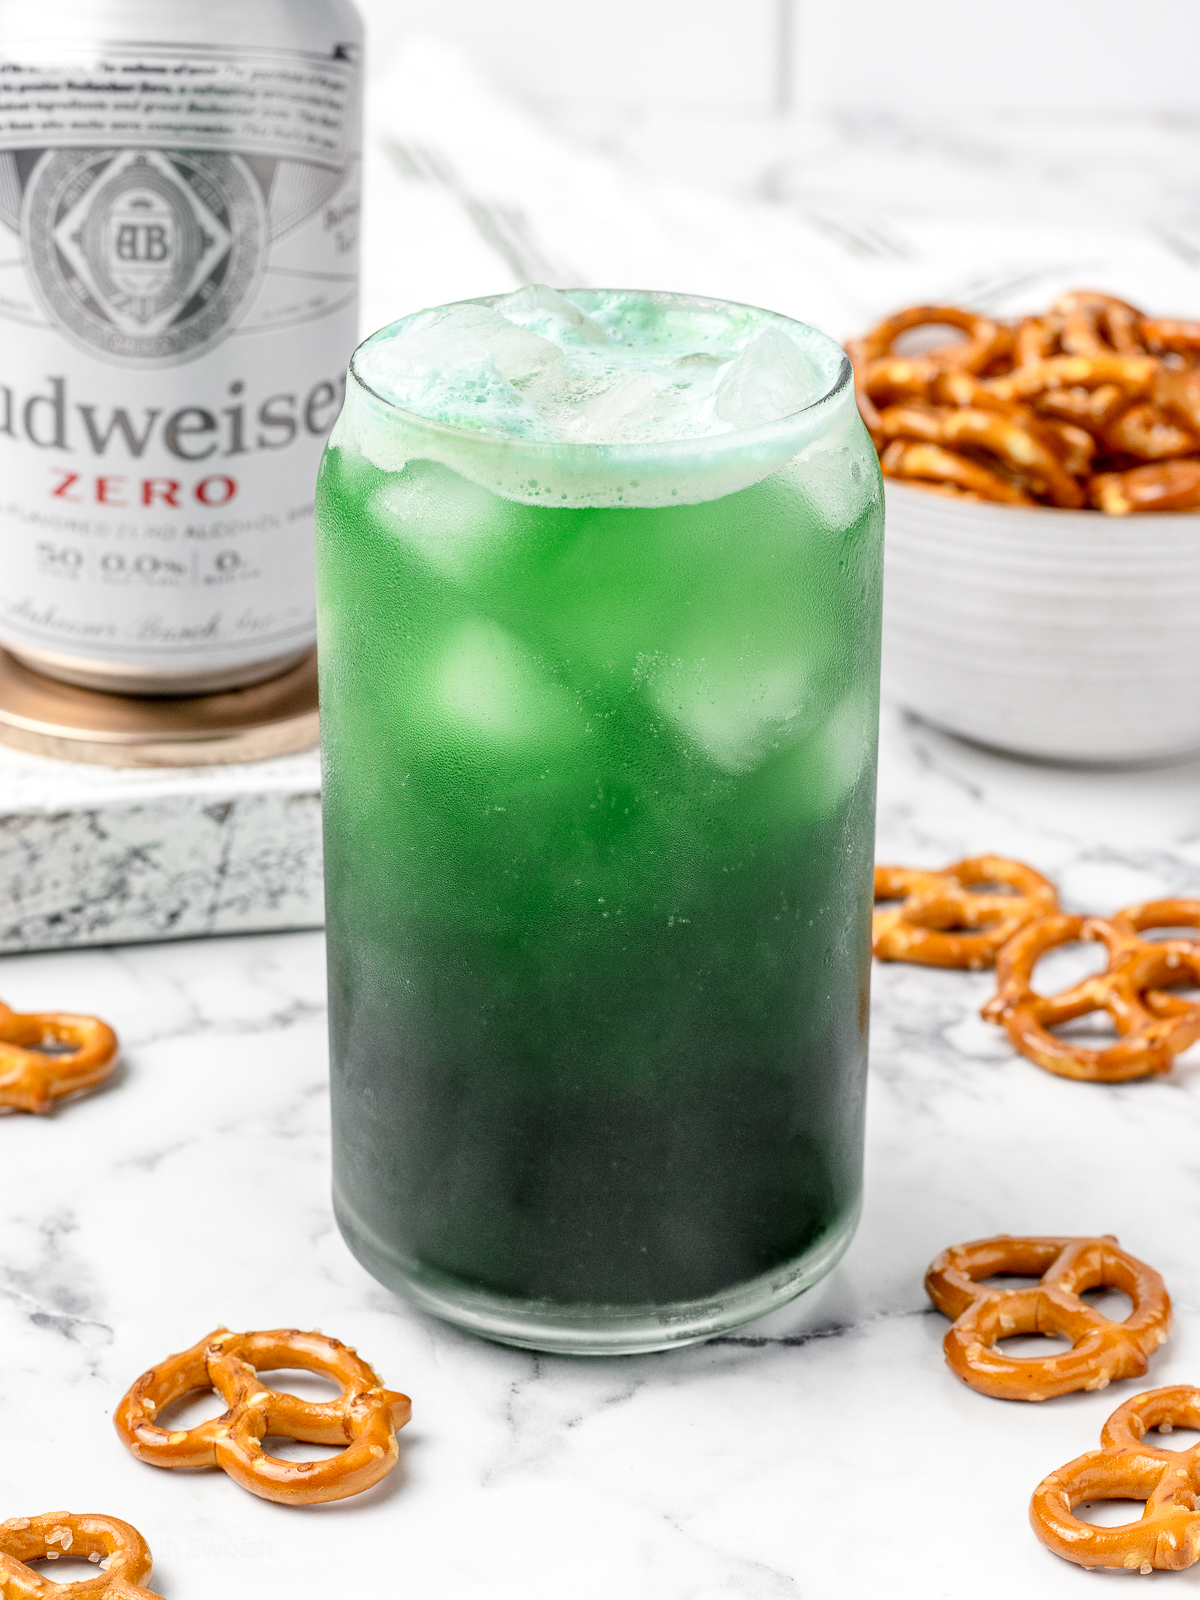 A non alcoholic green beer with another beer and pretzels in the background.